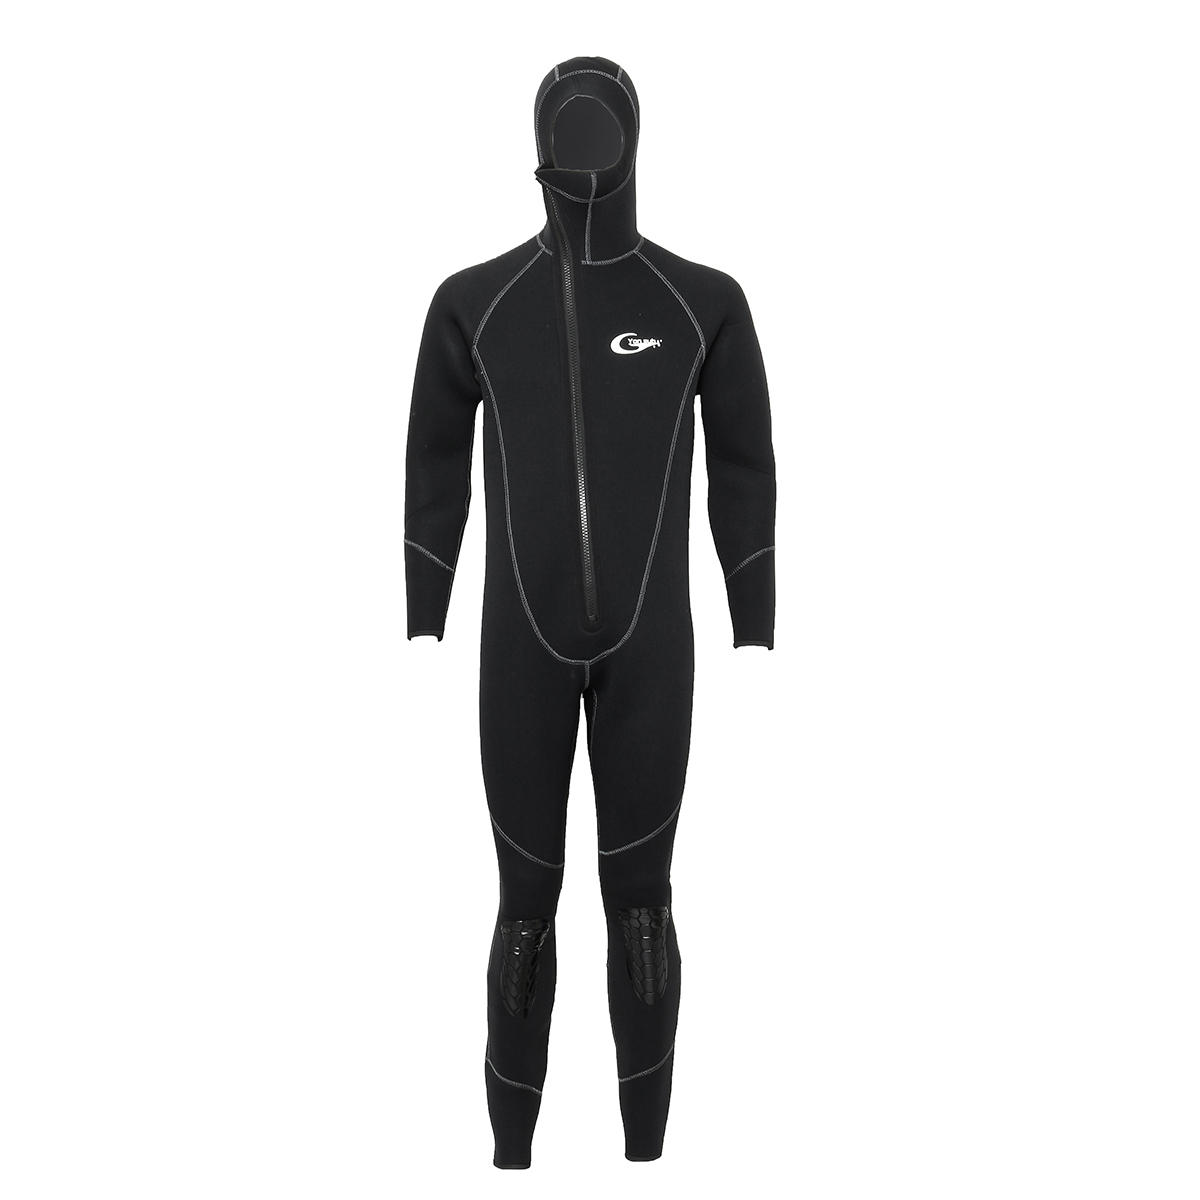 Yon Sub 5MM Neoprene Front Zipper Diving Snorkeling Swimming Suit Set Long Sleeves Men Wetsuit Surfing Suit With Hooded